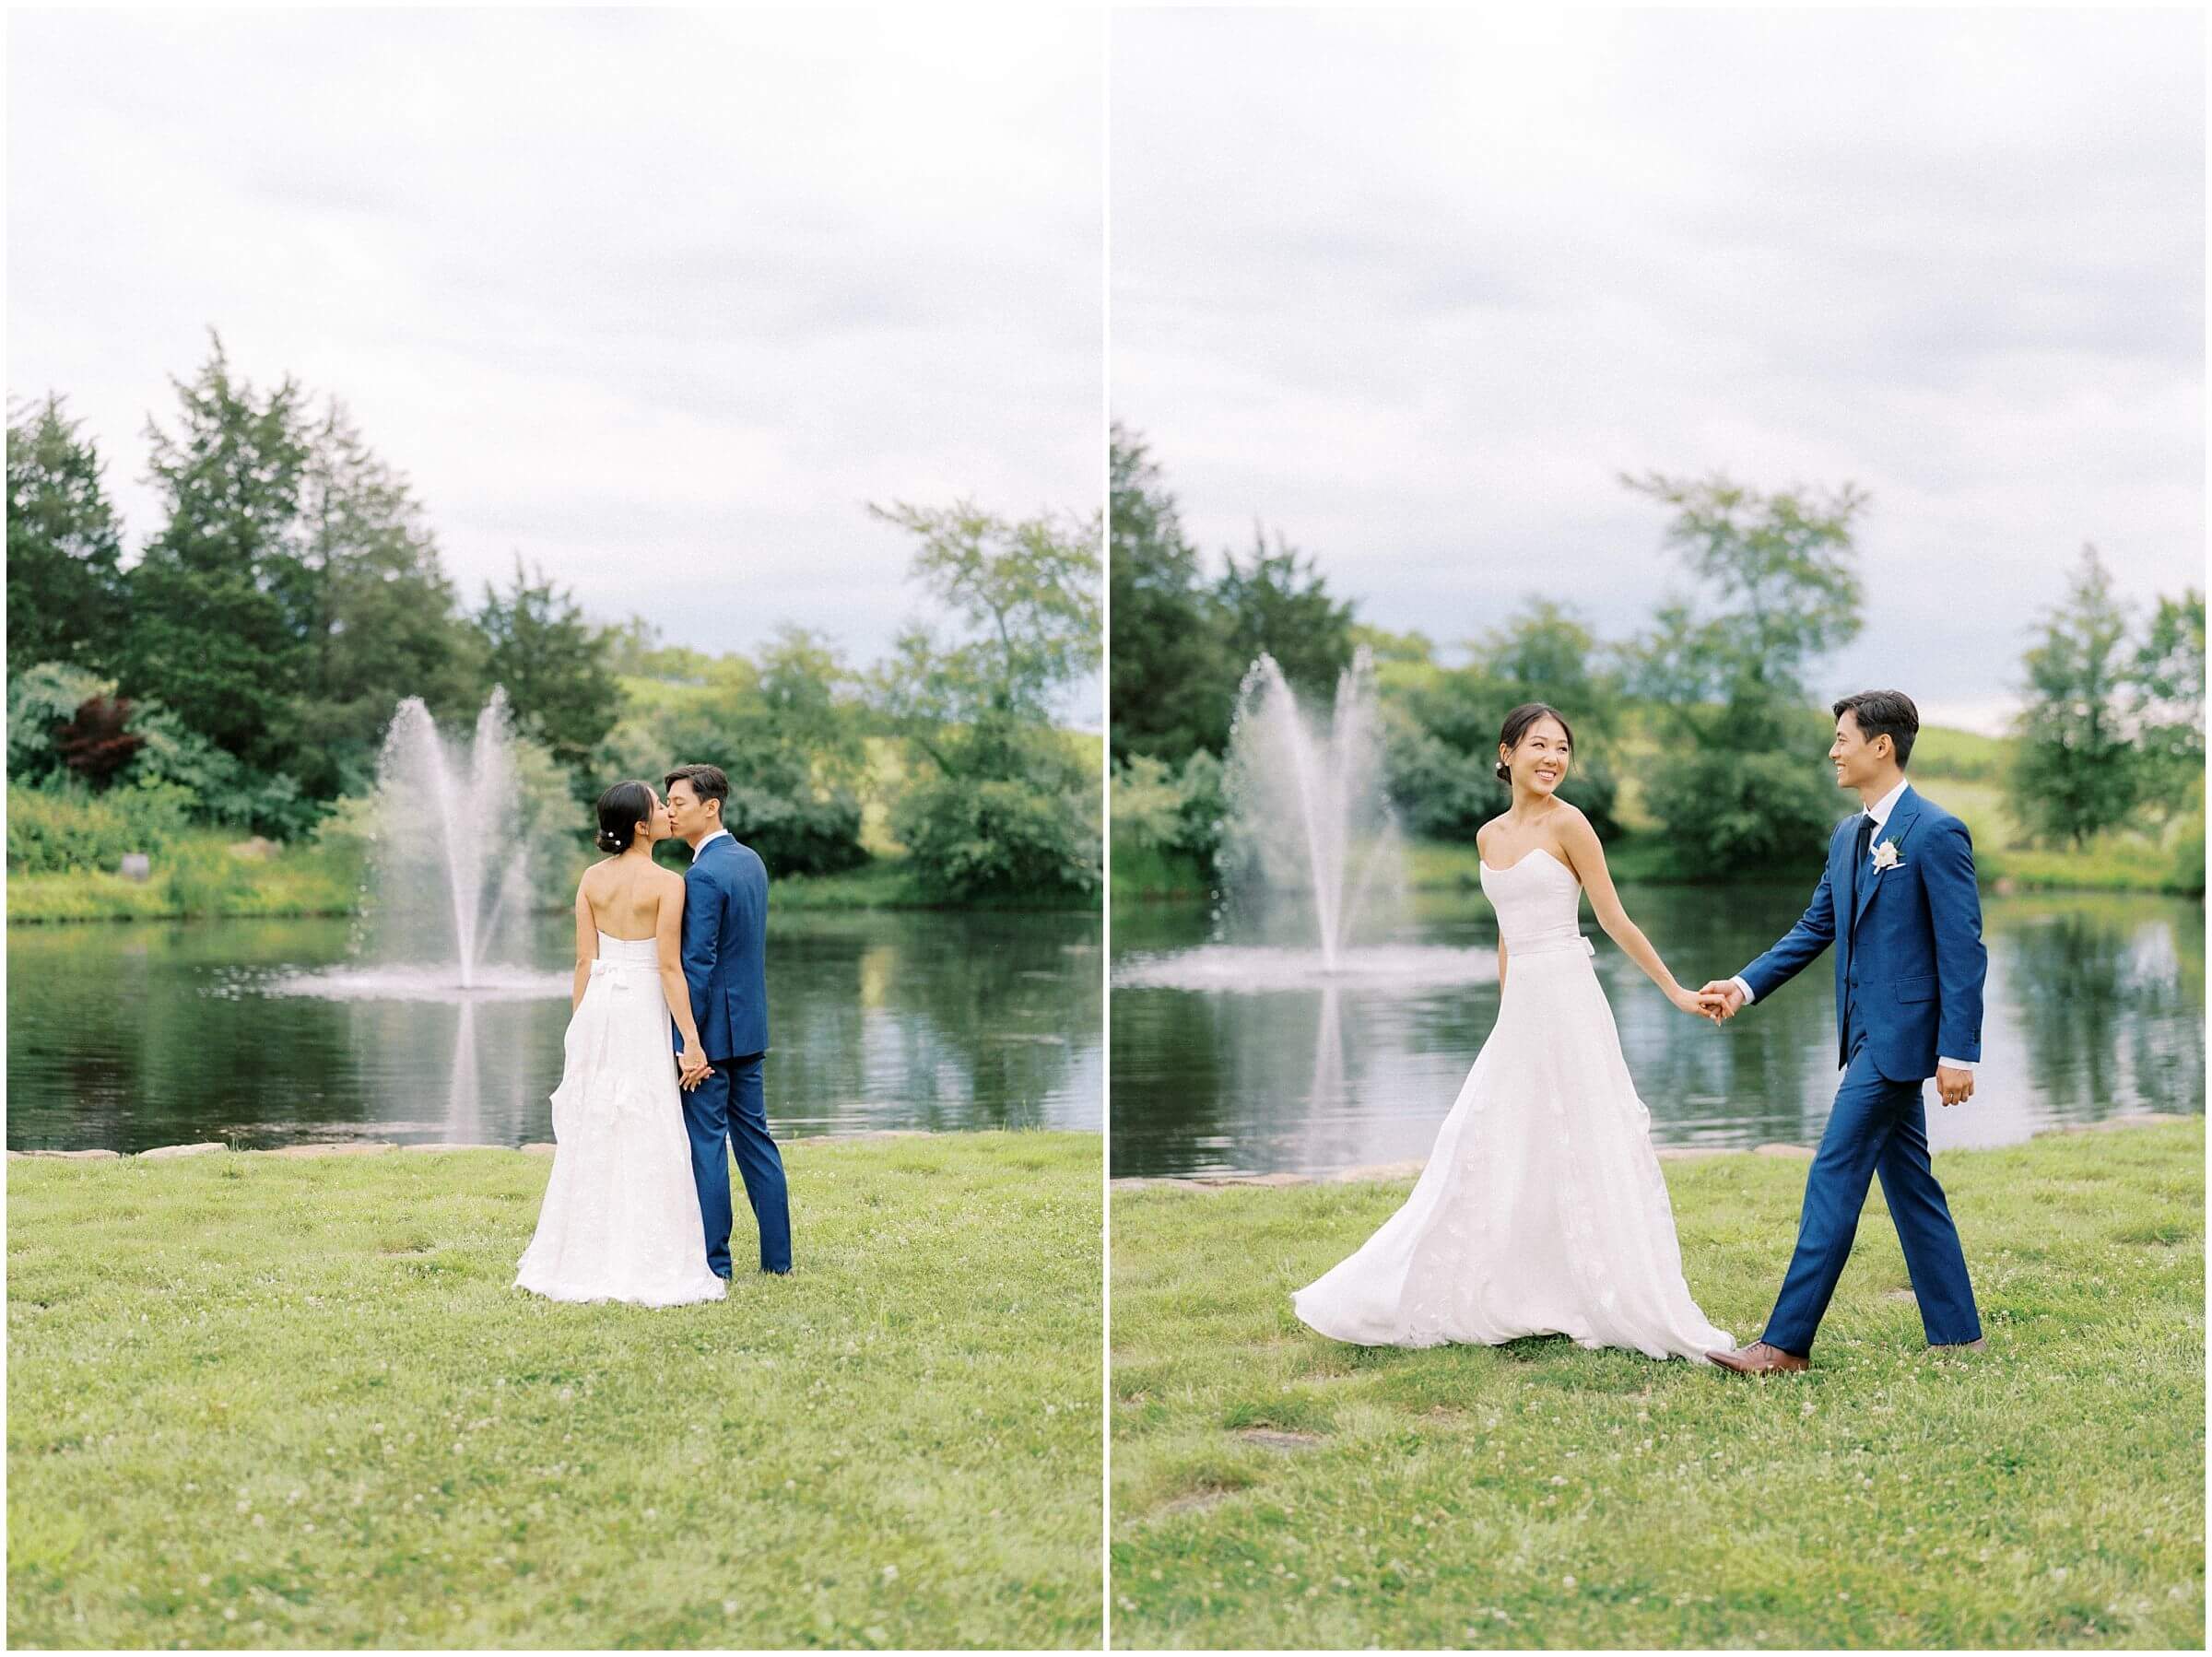 Asian fusion wedding at Stone Tower Winery. Captured by DC luxury multicultural wedding photographer Winnie Dora